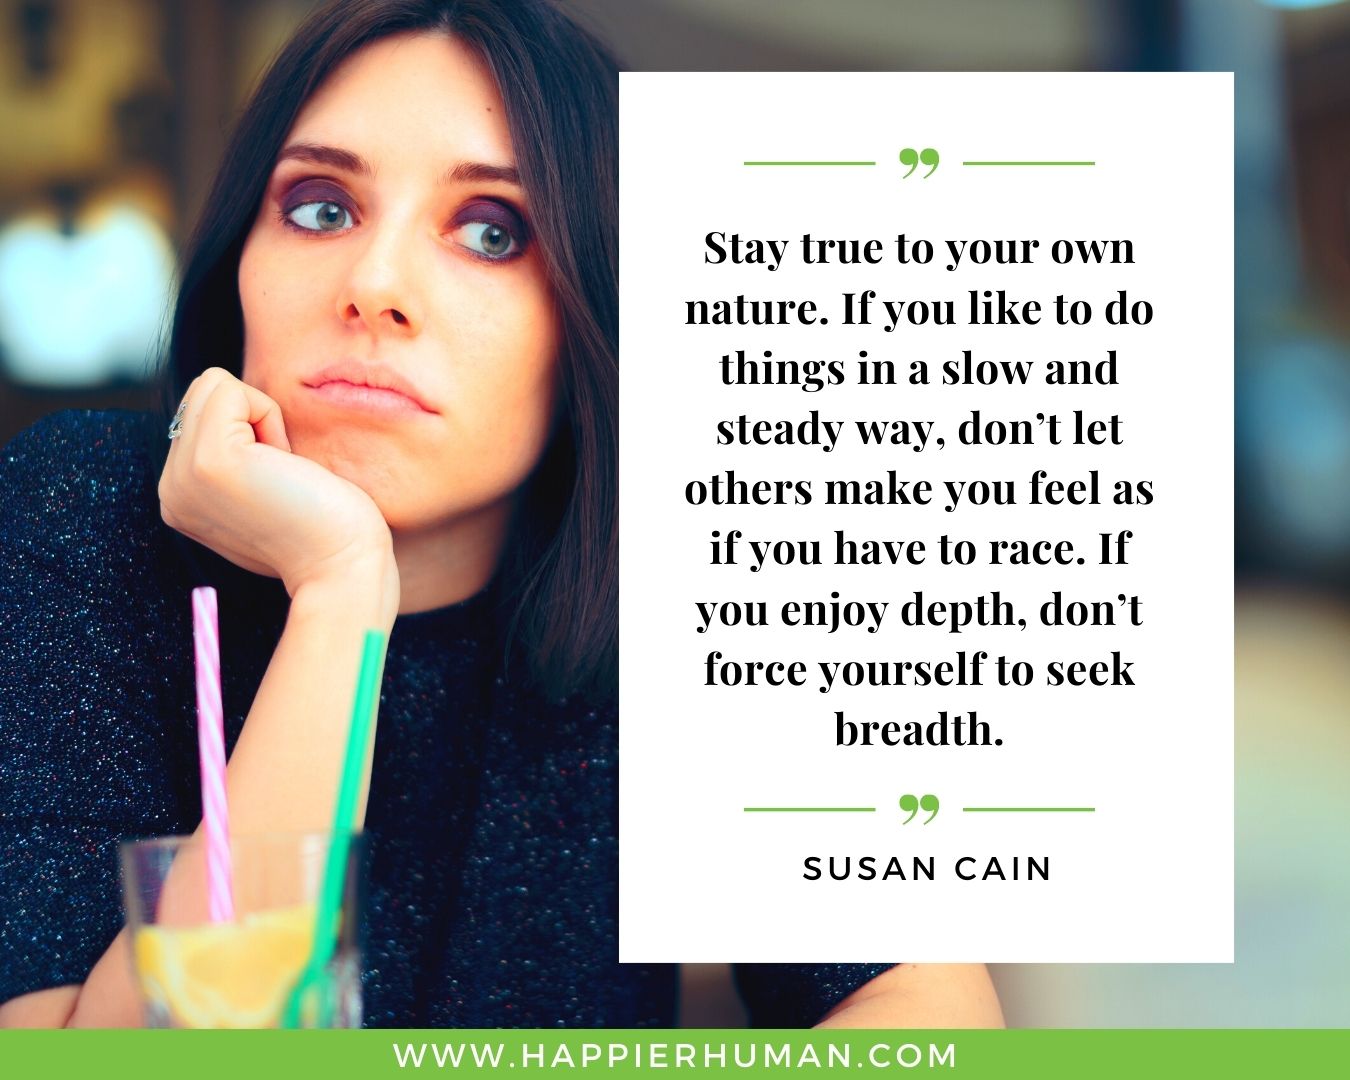 Introvert Quotes - “Stay true to your own nature. If you like to do things in a slow and steady way, don’t let others make you feel as if you have to race. If you enjoy depth, don’t force yourself to seek breadth.” – Susan Cain